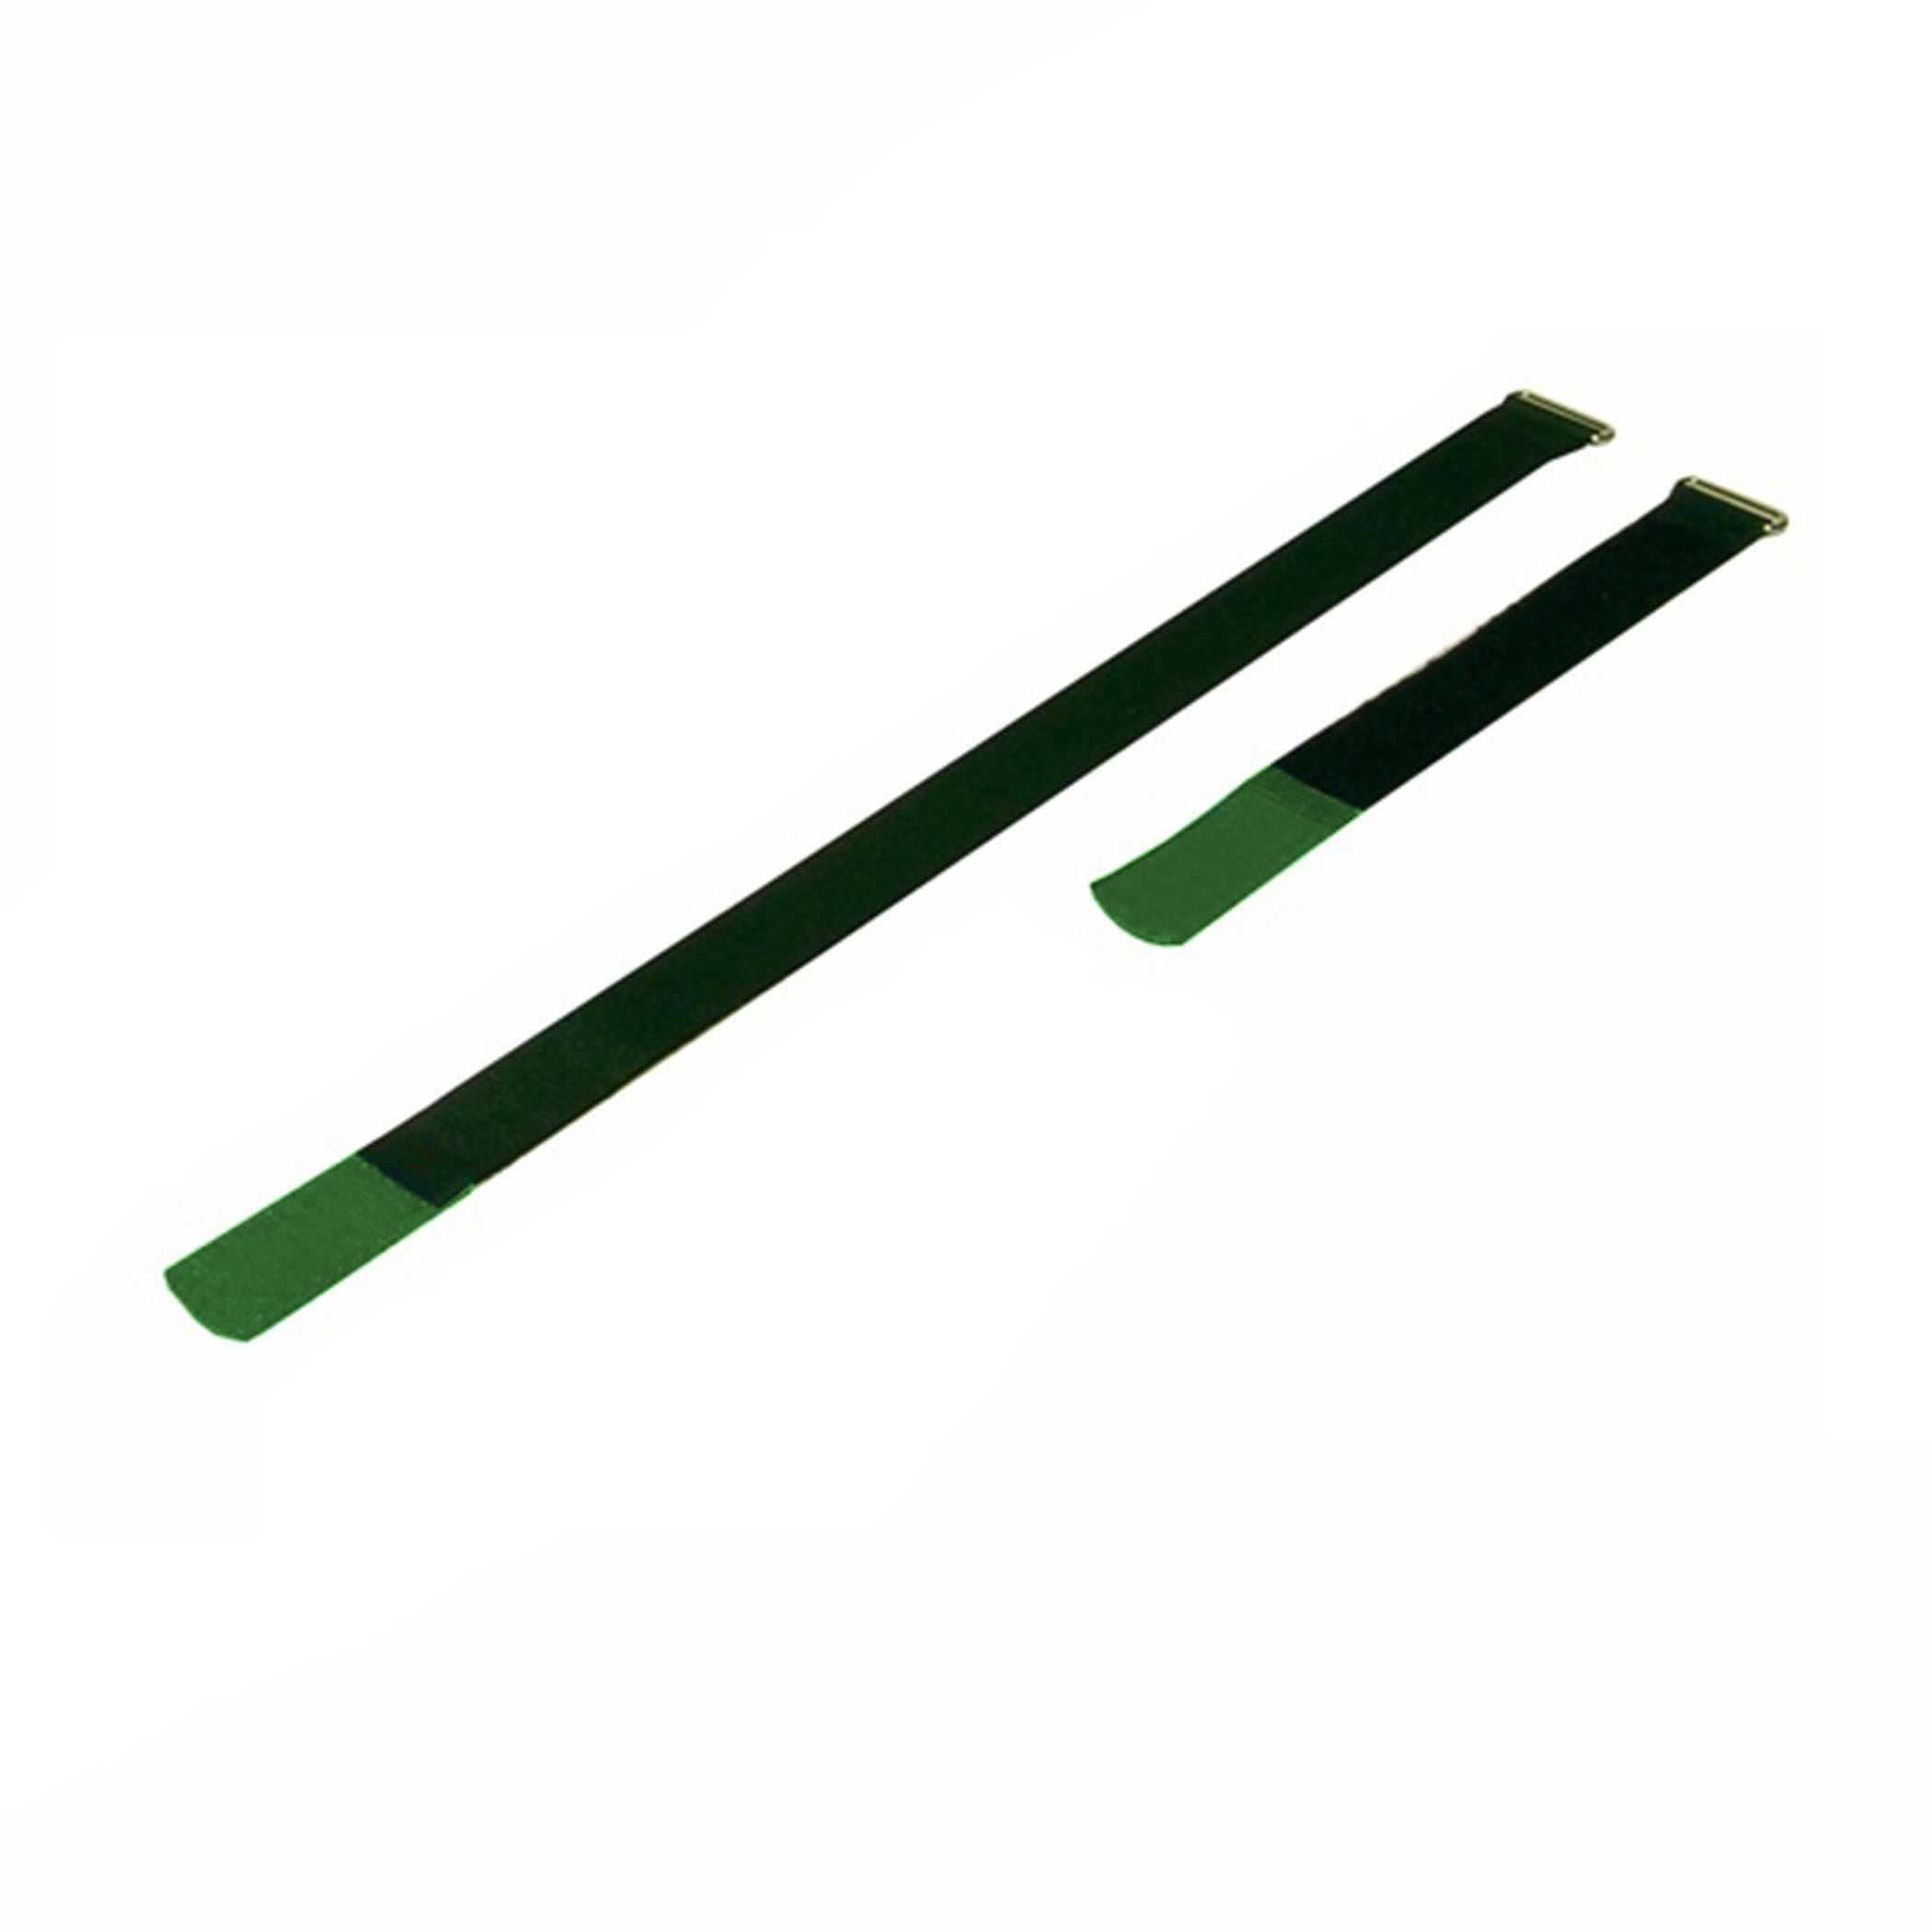 Cable Tie 170x25mm with Hook Green, (10 pieces) - a2517-820h